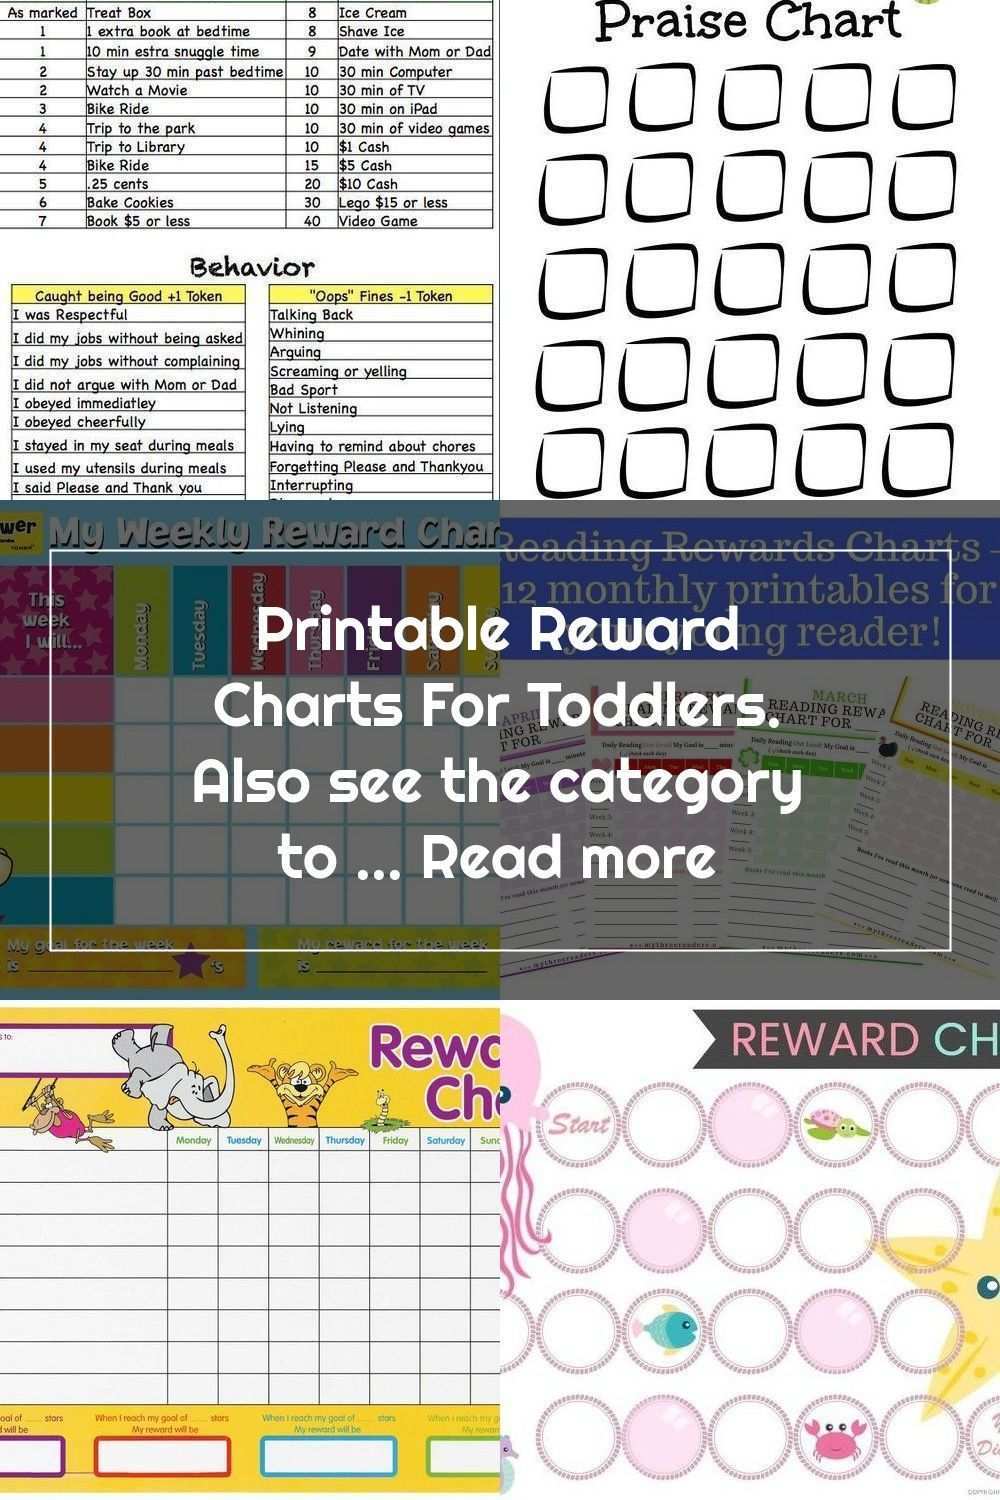 Printable Reward Charts For Toddlers Also See The Category To Read Mor In 2020